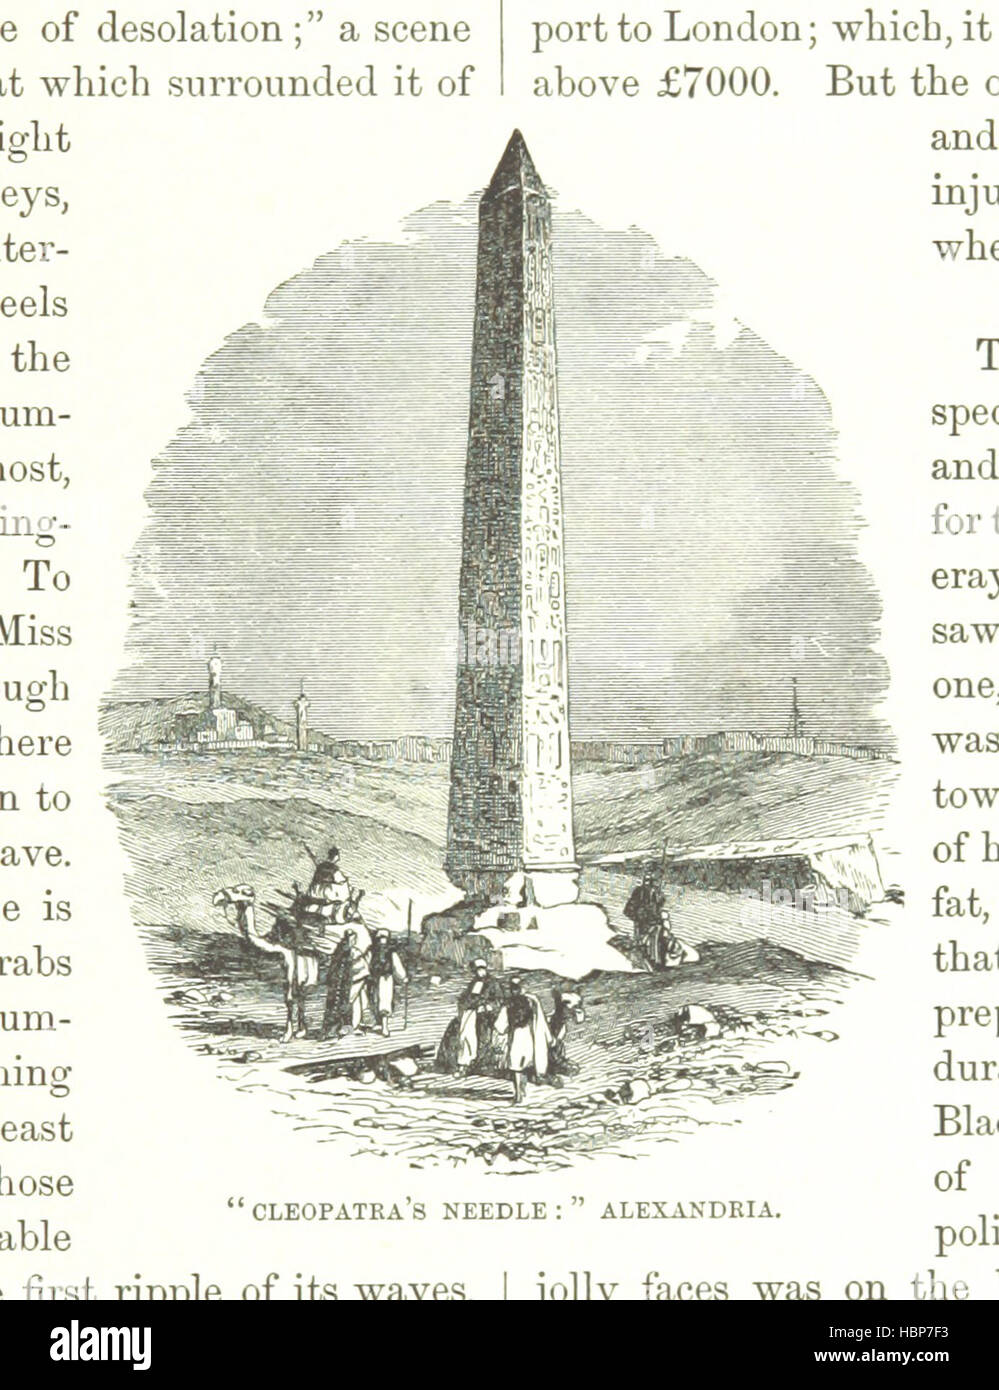 The Mediterranean illustrated. Picturesque views and descriptions of its cities, shores and islands. By the author of “The Buried Cities of Campania” [W. H. D. Adams], etc Image taken from page 337 of 'The Mediterranean illustrated Picturesque Stock Photo